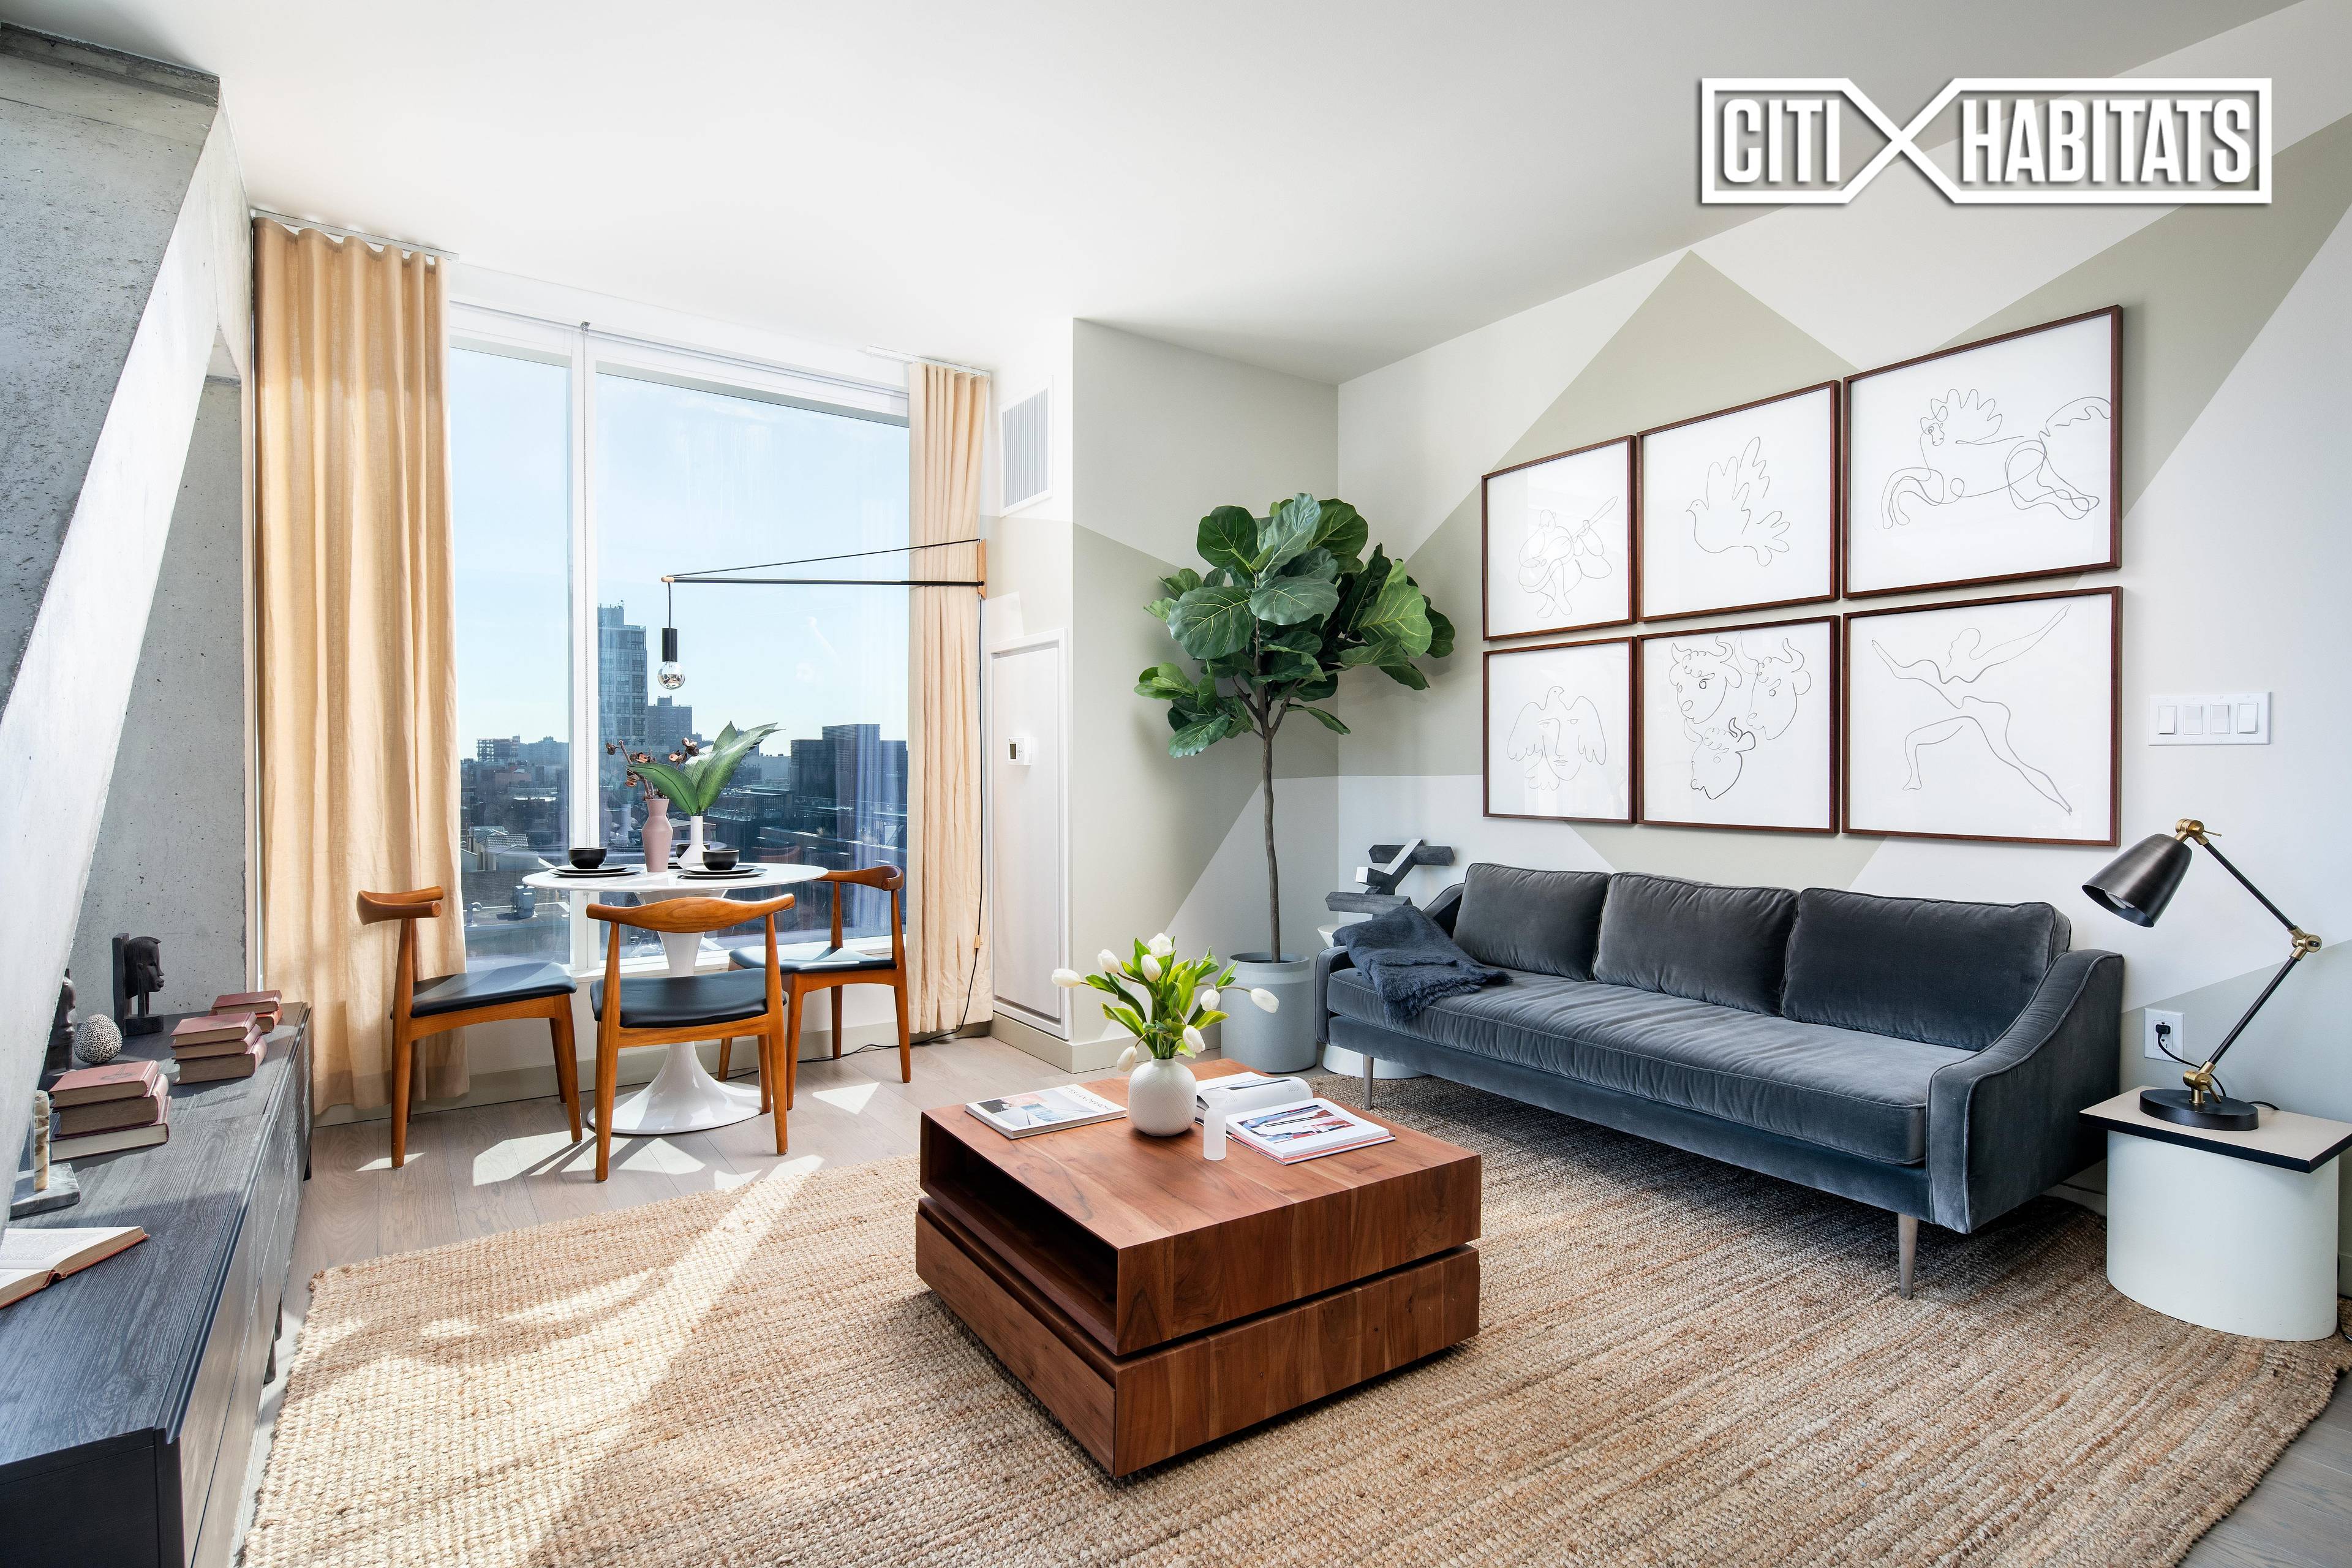 420 Kent Phase 2. Staycation RefinedThe best architecture, with the best views, in the best neighborhood.